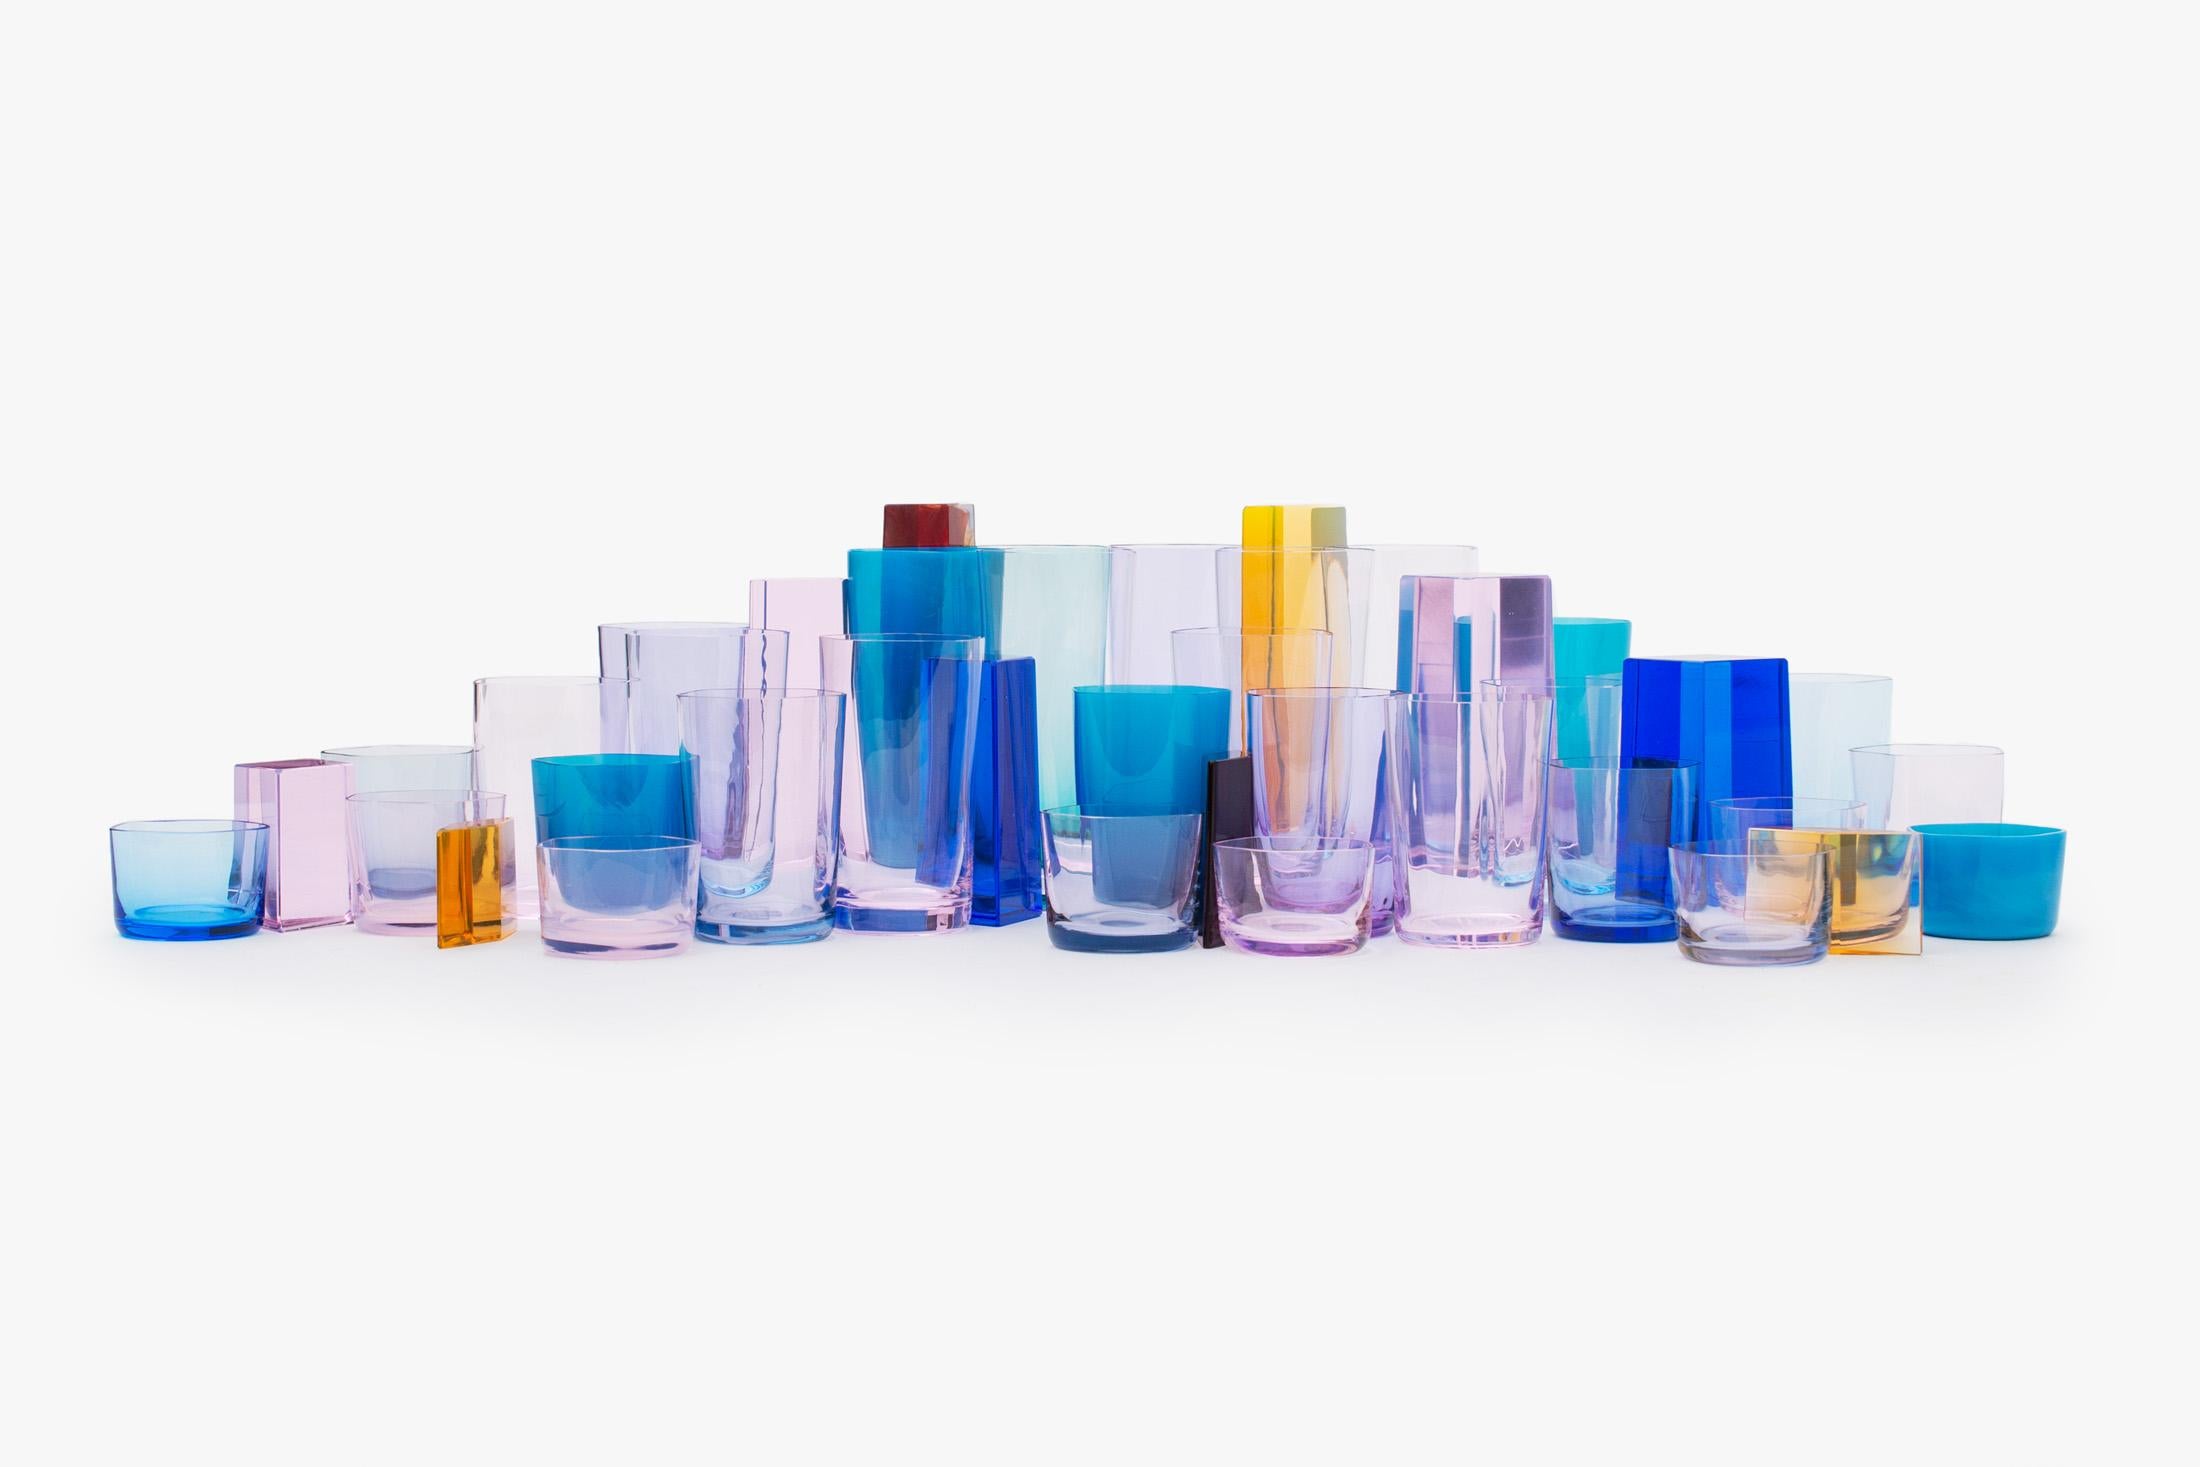 OAO Works Project 31.3 is a body of 41 individual glass elements designed to be arranged into a multiplicity of compositions. The forms of 31.3 Polygon Glassware can be traced back to two distinct sources: a mathematical query into geometric tiling